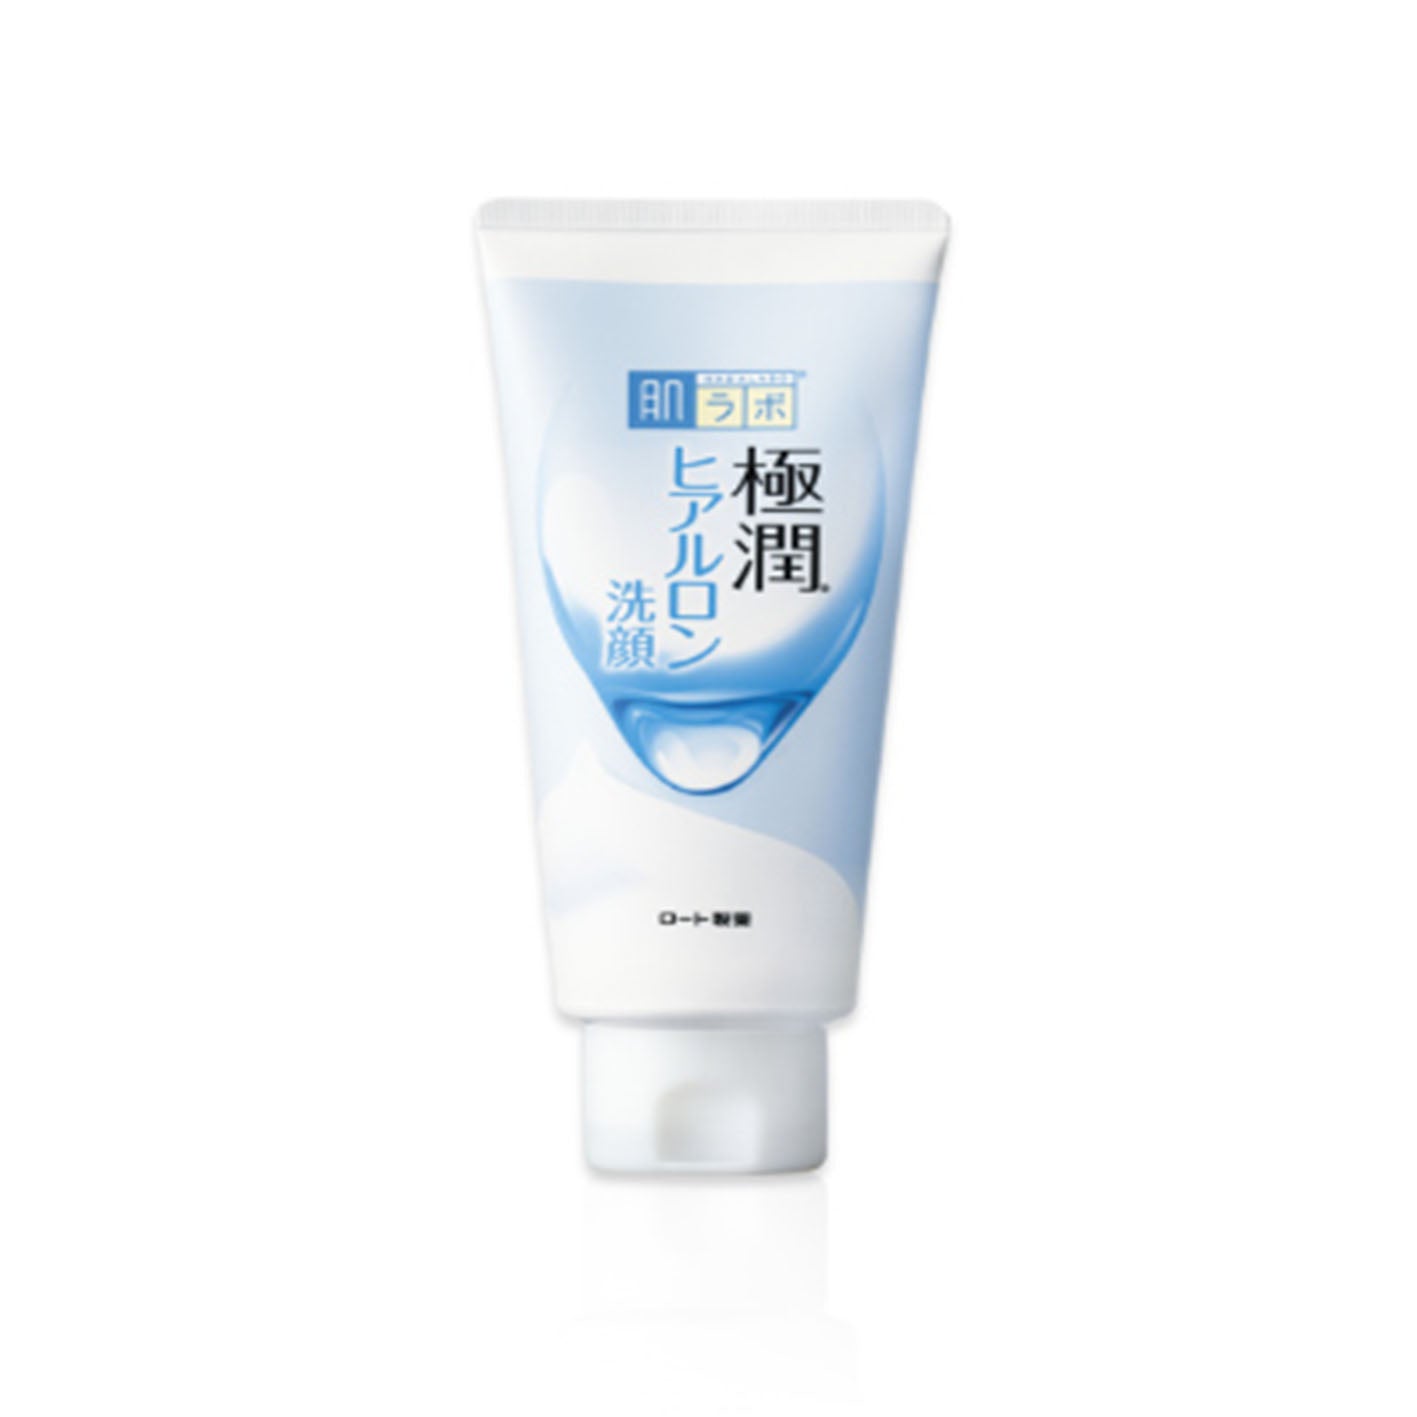 Rohto Hadalabo Gokujyn Foam Cleanser - 100g - Harajuku Culture Japan - Japanease Products Store Beauty and Stationery